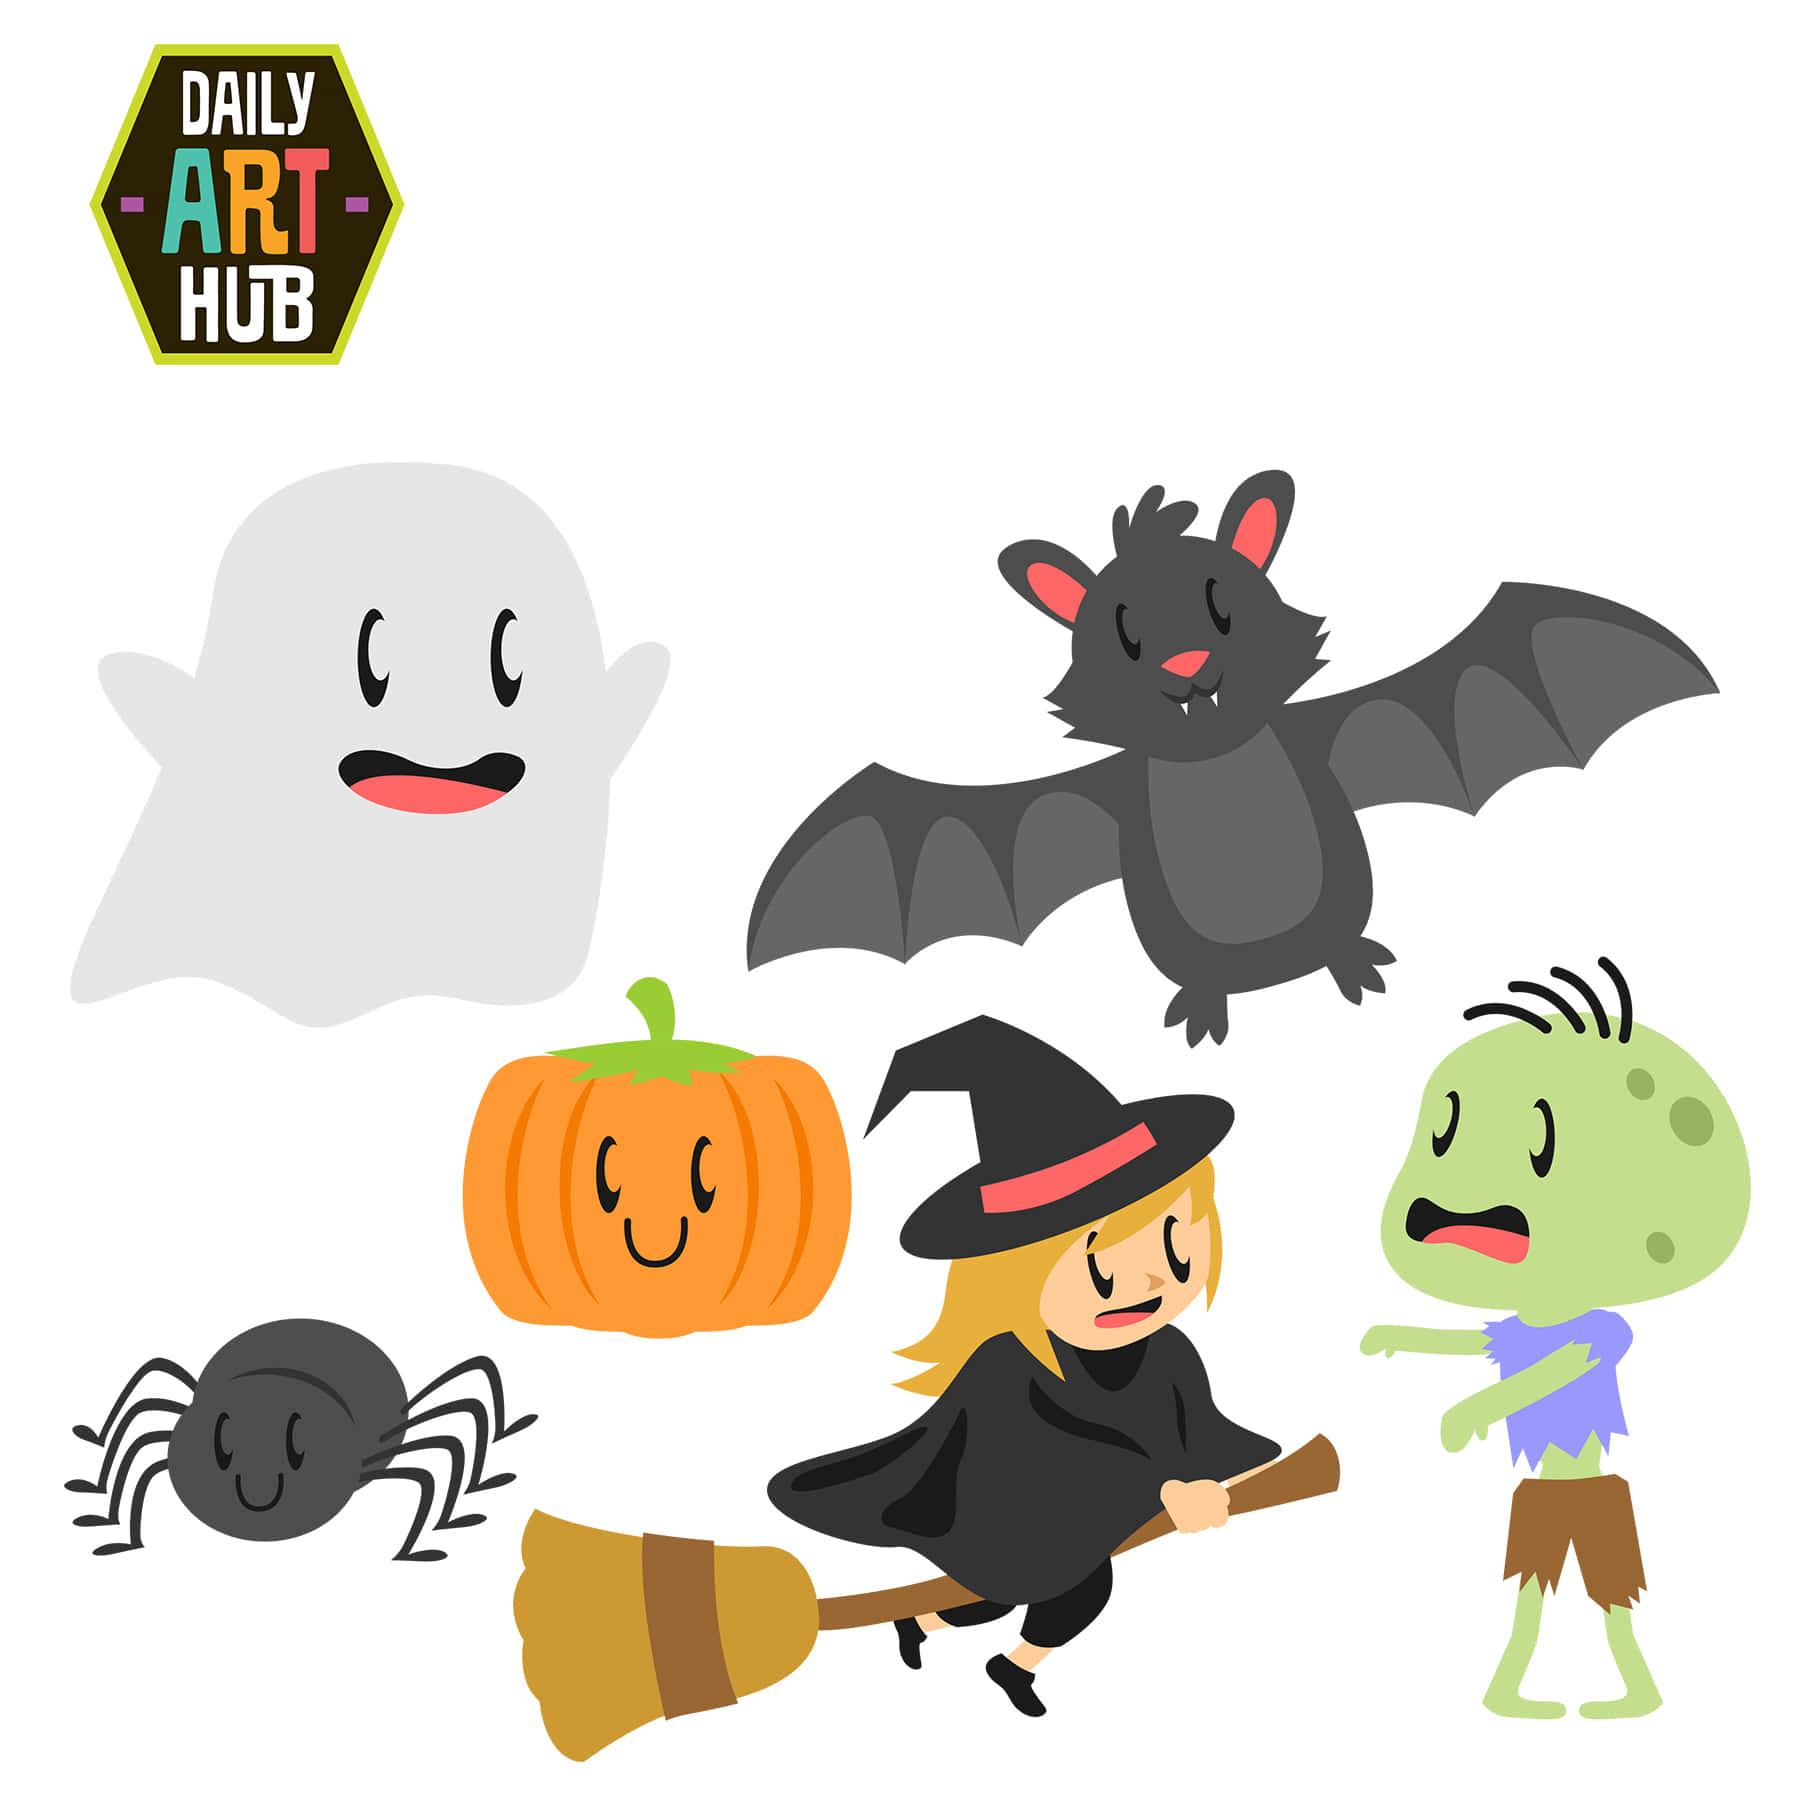 Get into the spooky spirits of this Halloween season with this adorable shot!